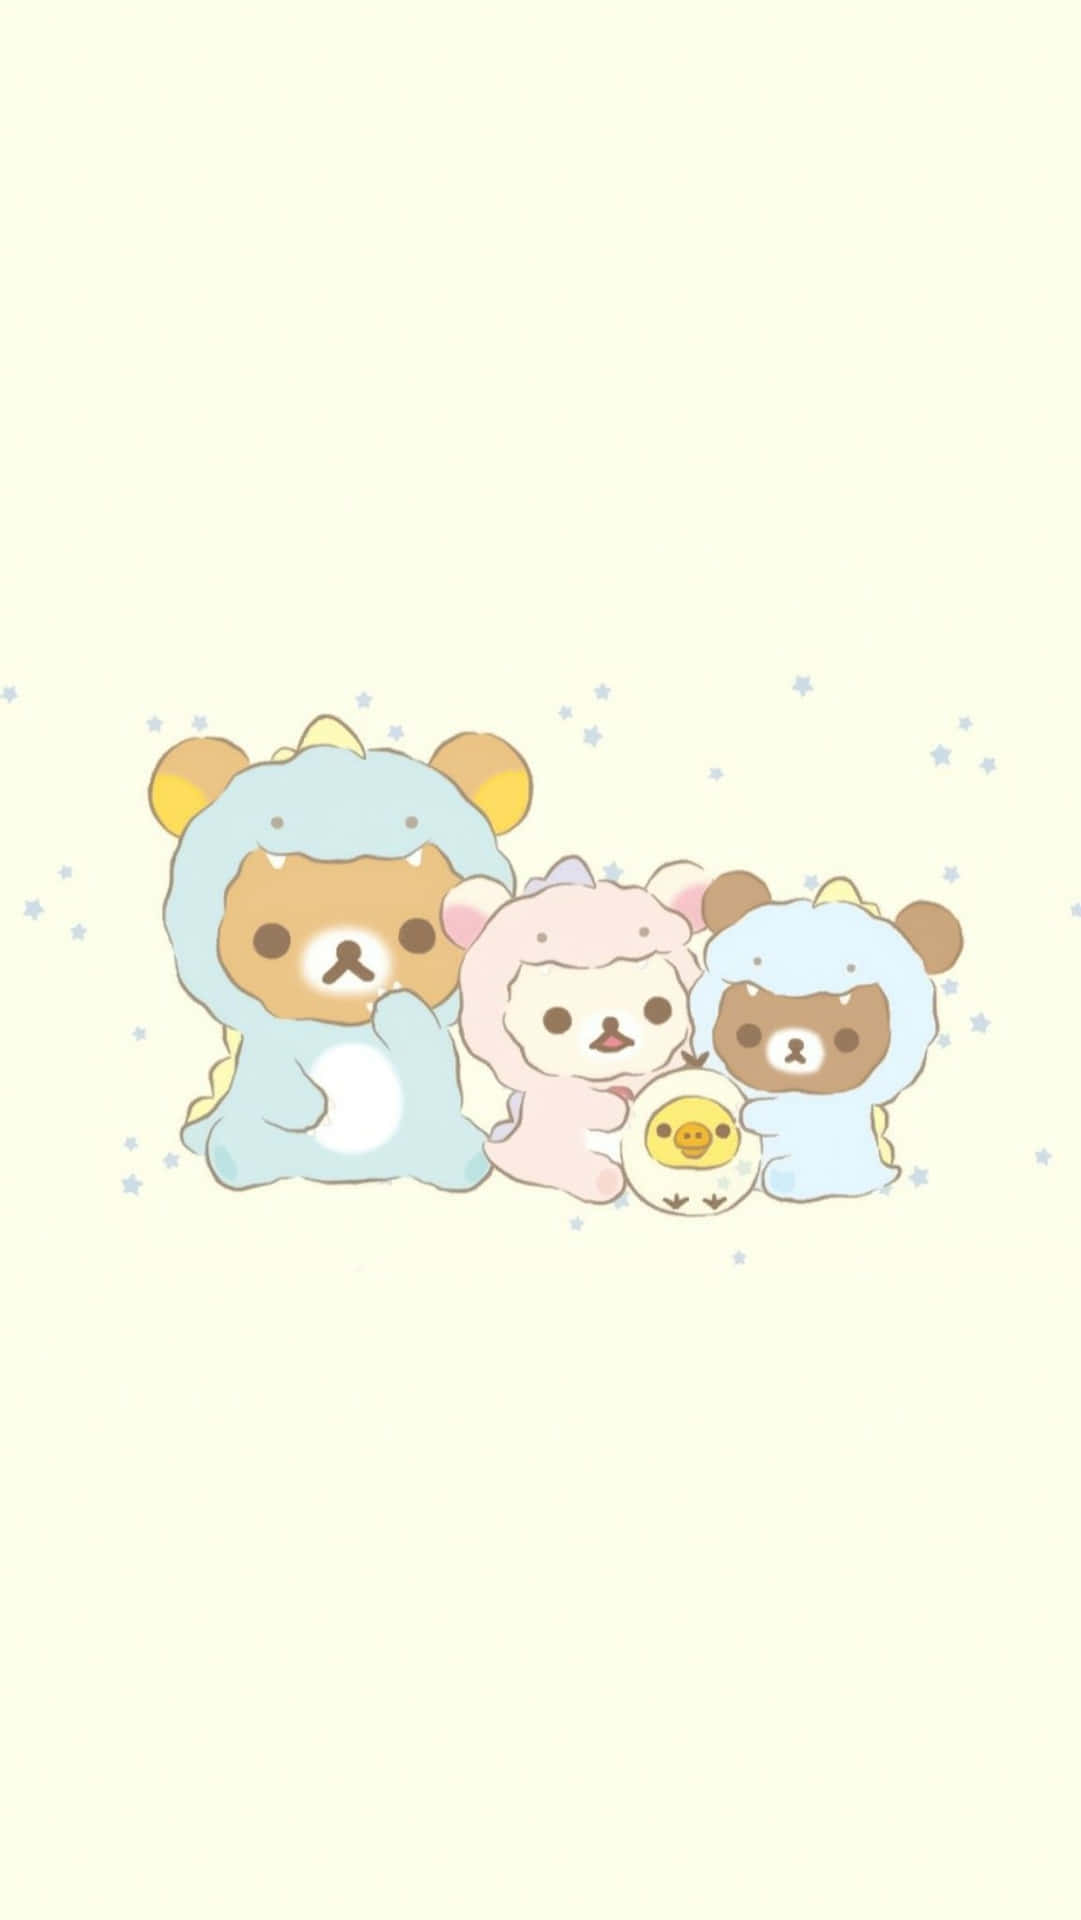 Download Brighten up your day with some Kawaii Rilakkuma! Wallpaper ...